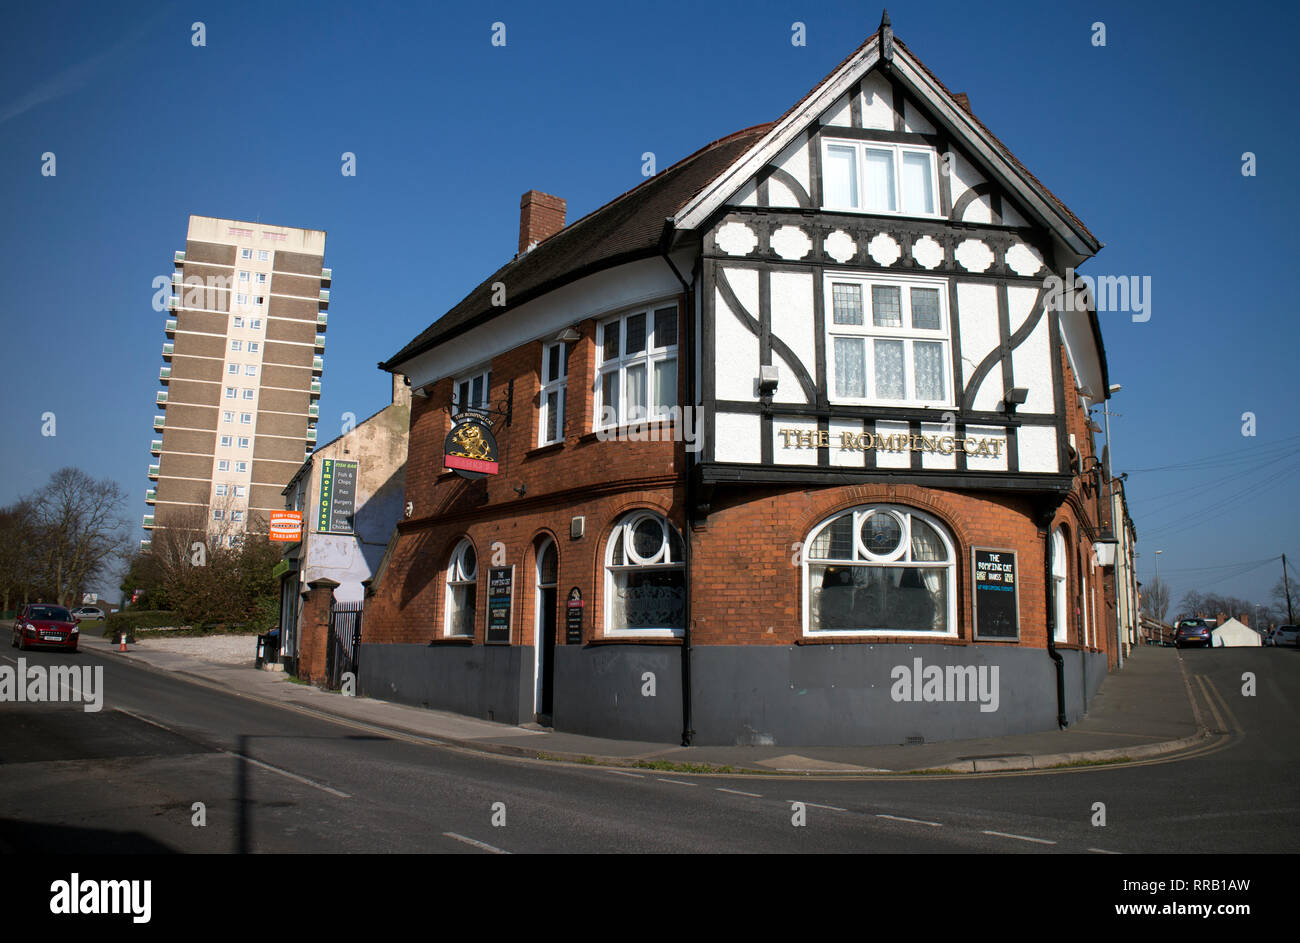 The Romping Cat pub, Bloxwich, West Midlands, England, UK Stock Photo